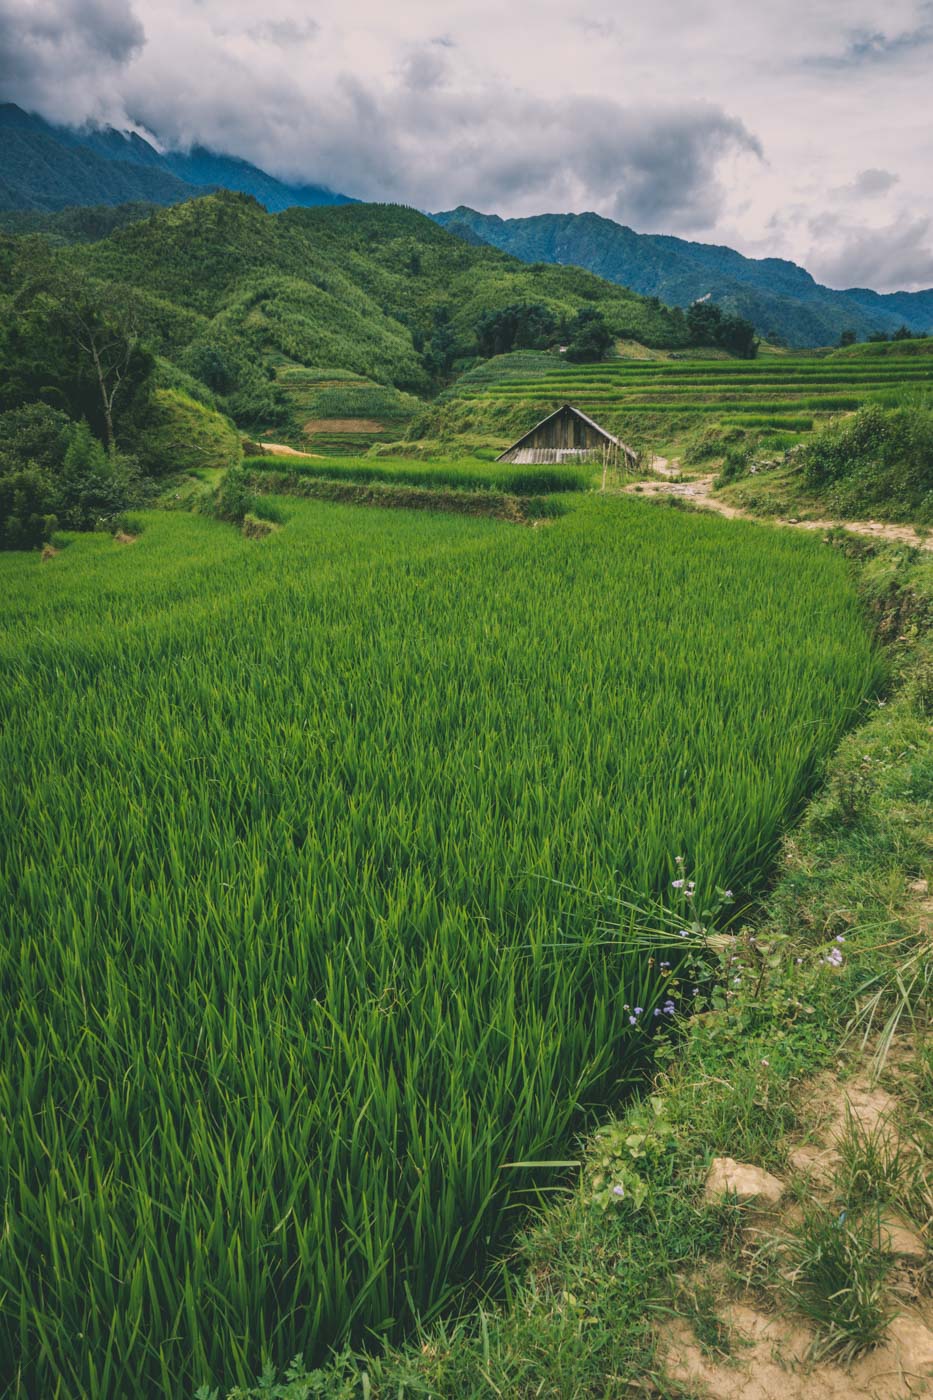 A peaceful and scenic view of Sapa